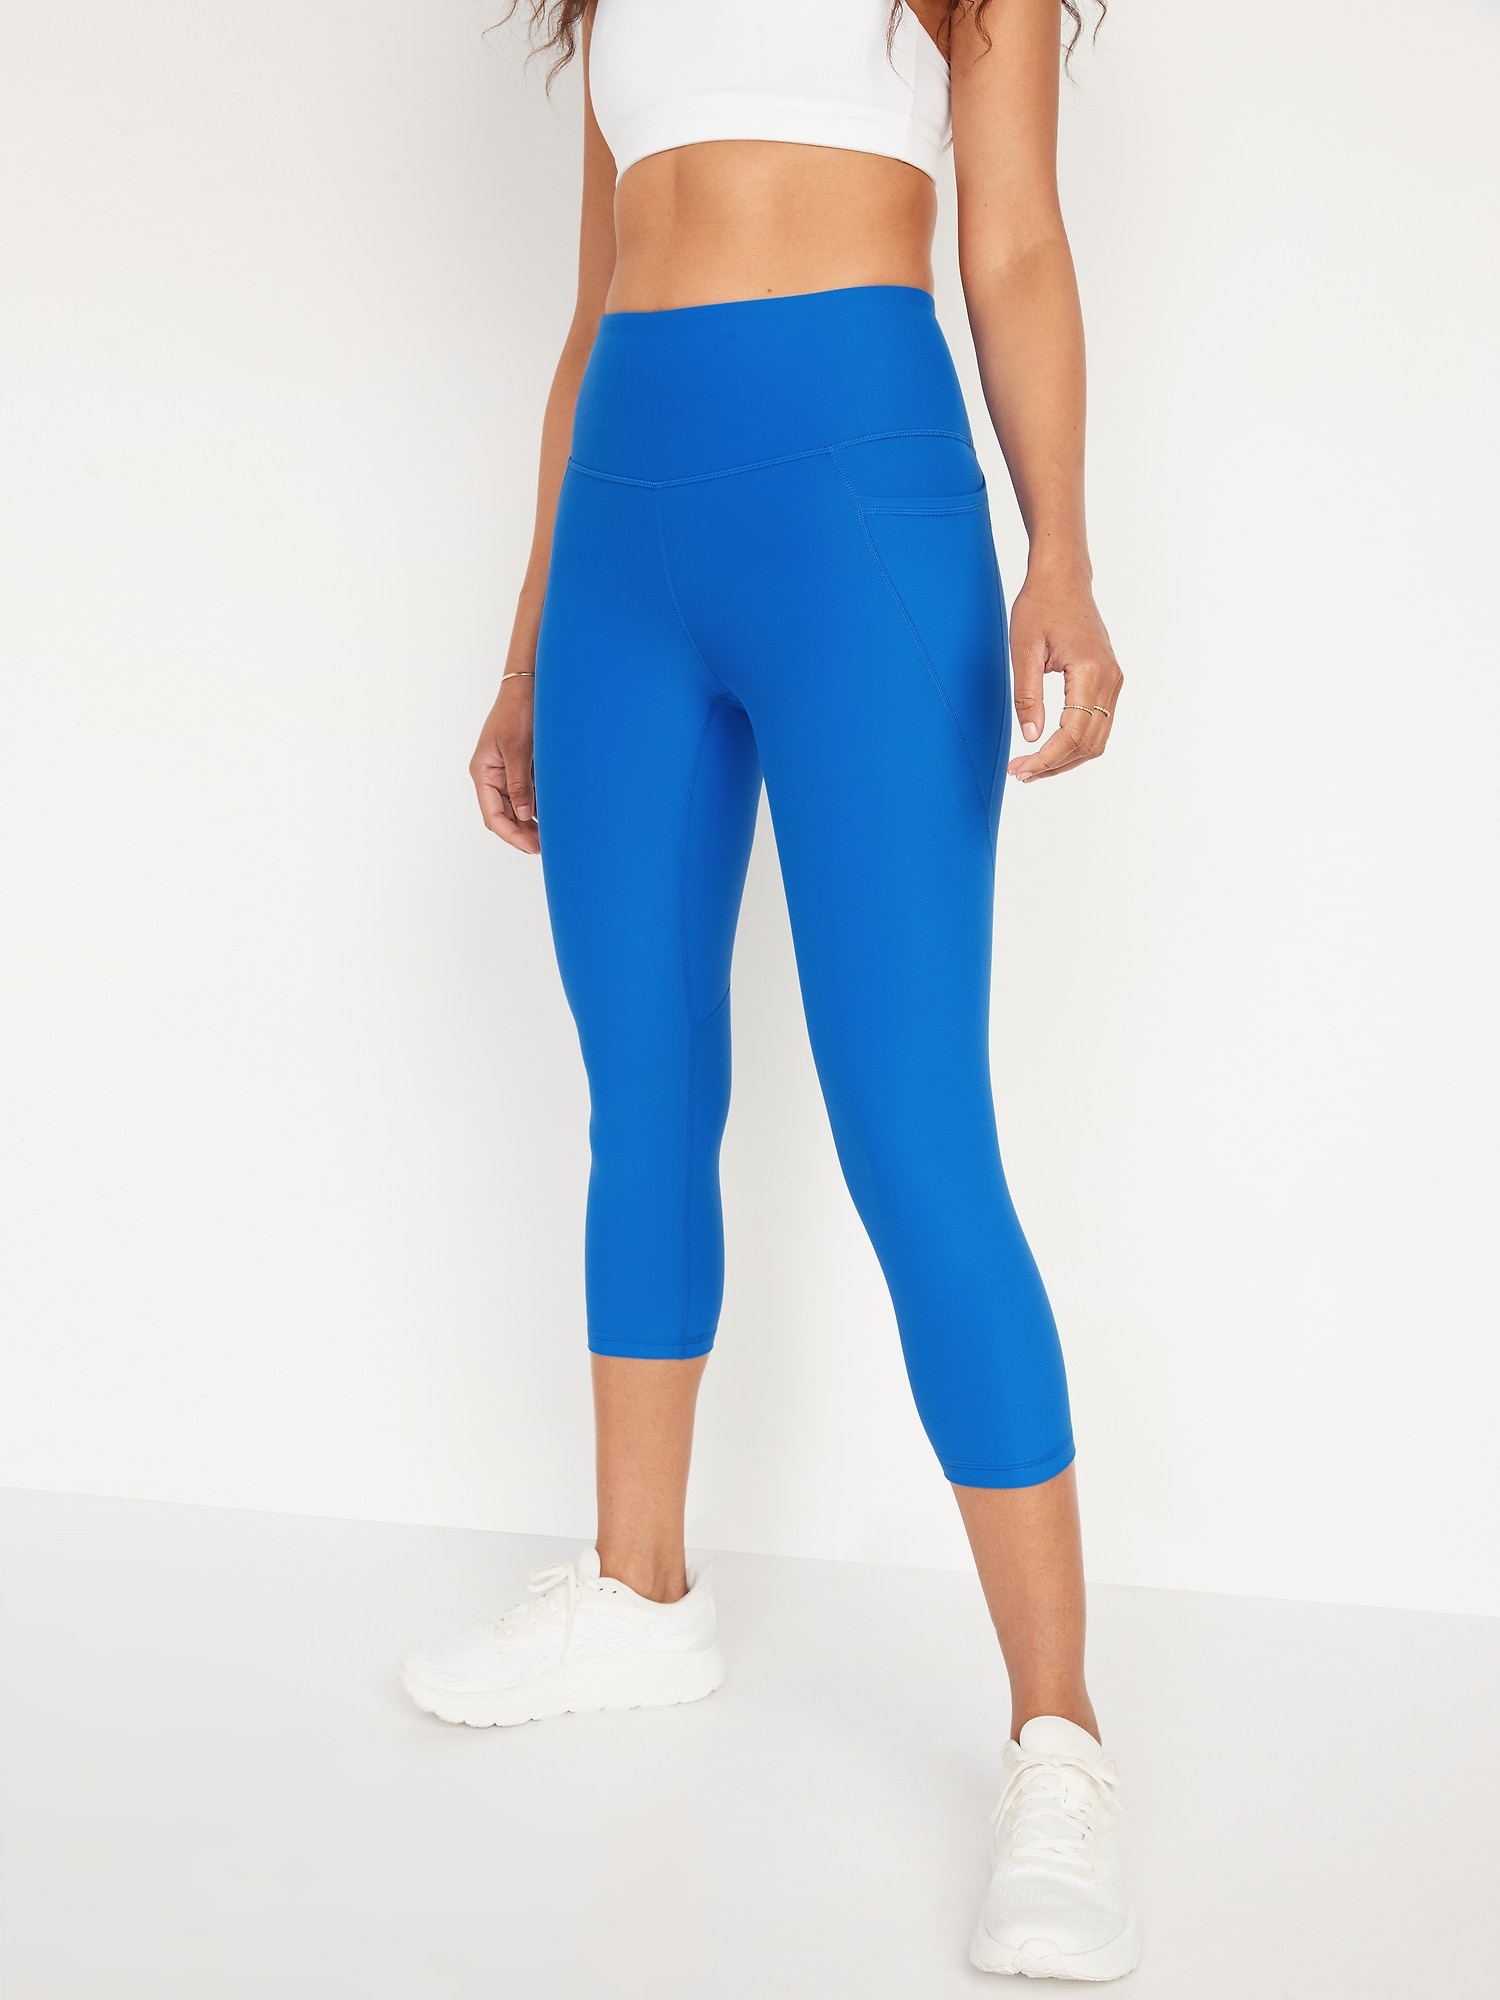 Buy Panelled Mid-Calf Length Leggings Online at Best Prices in